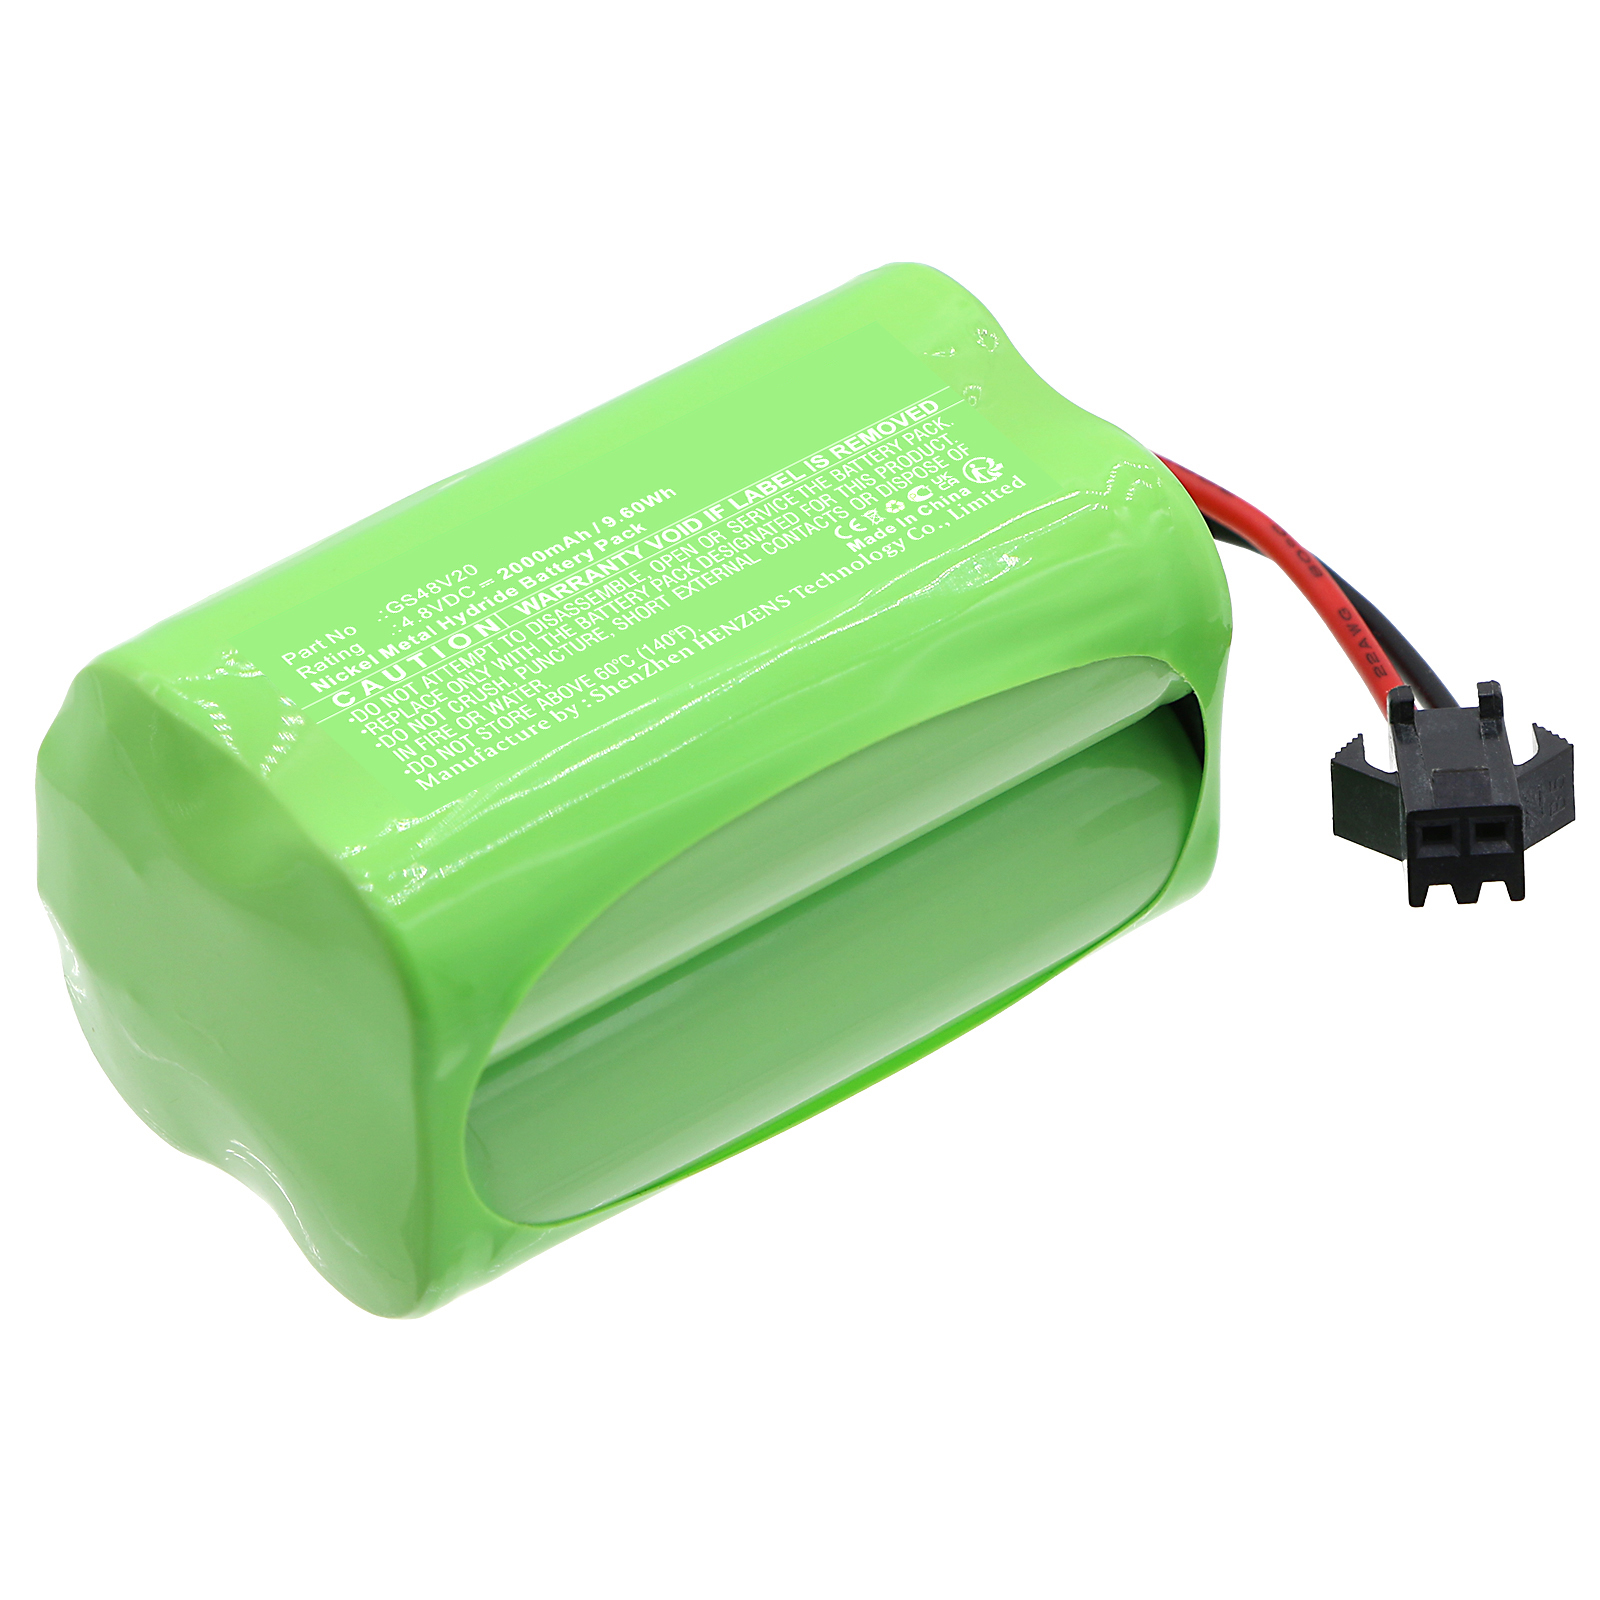 Synergy Digital Solar Battery, Compatible with Gama Sonic GS48V20 Solar Battery (Ni-MH, 4.8V, 2000mAh)